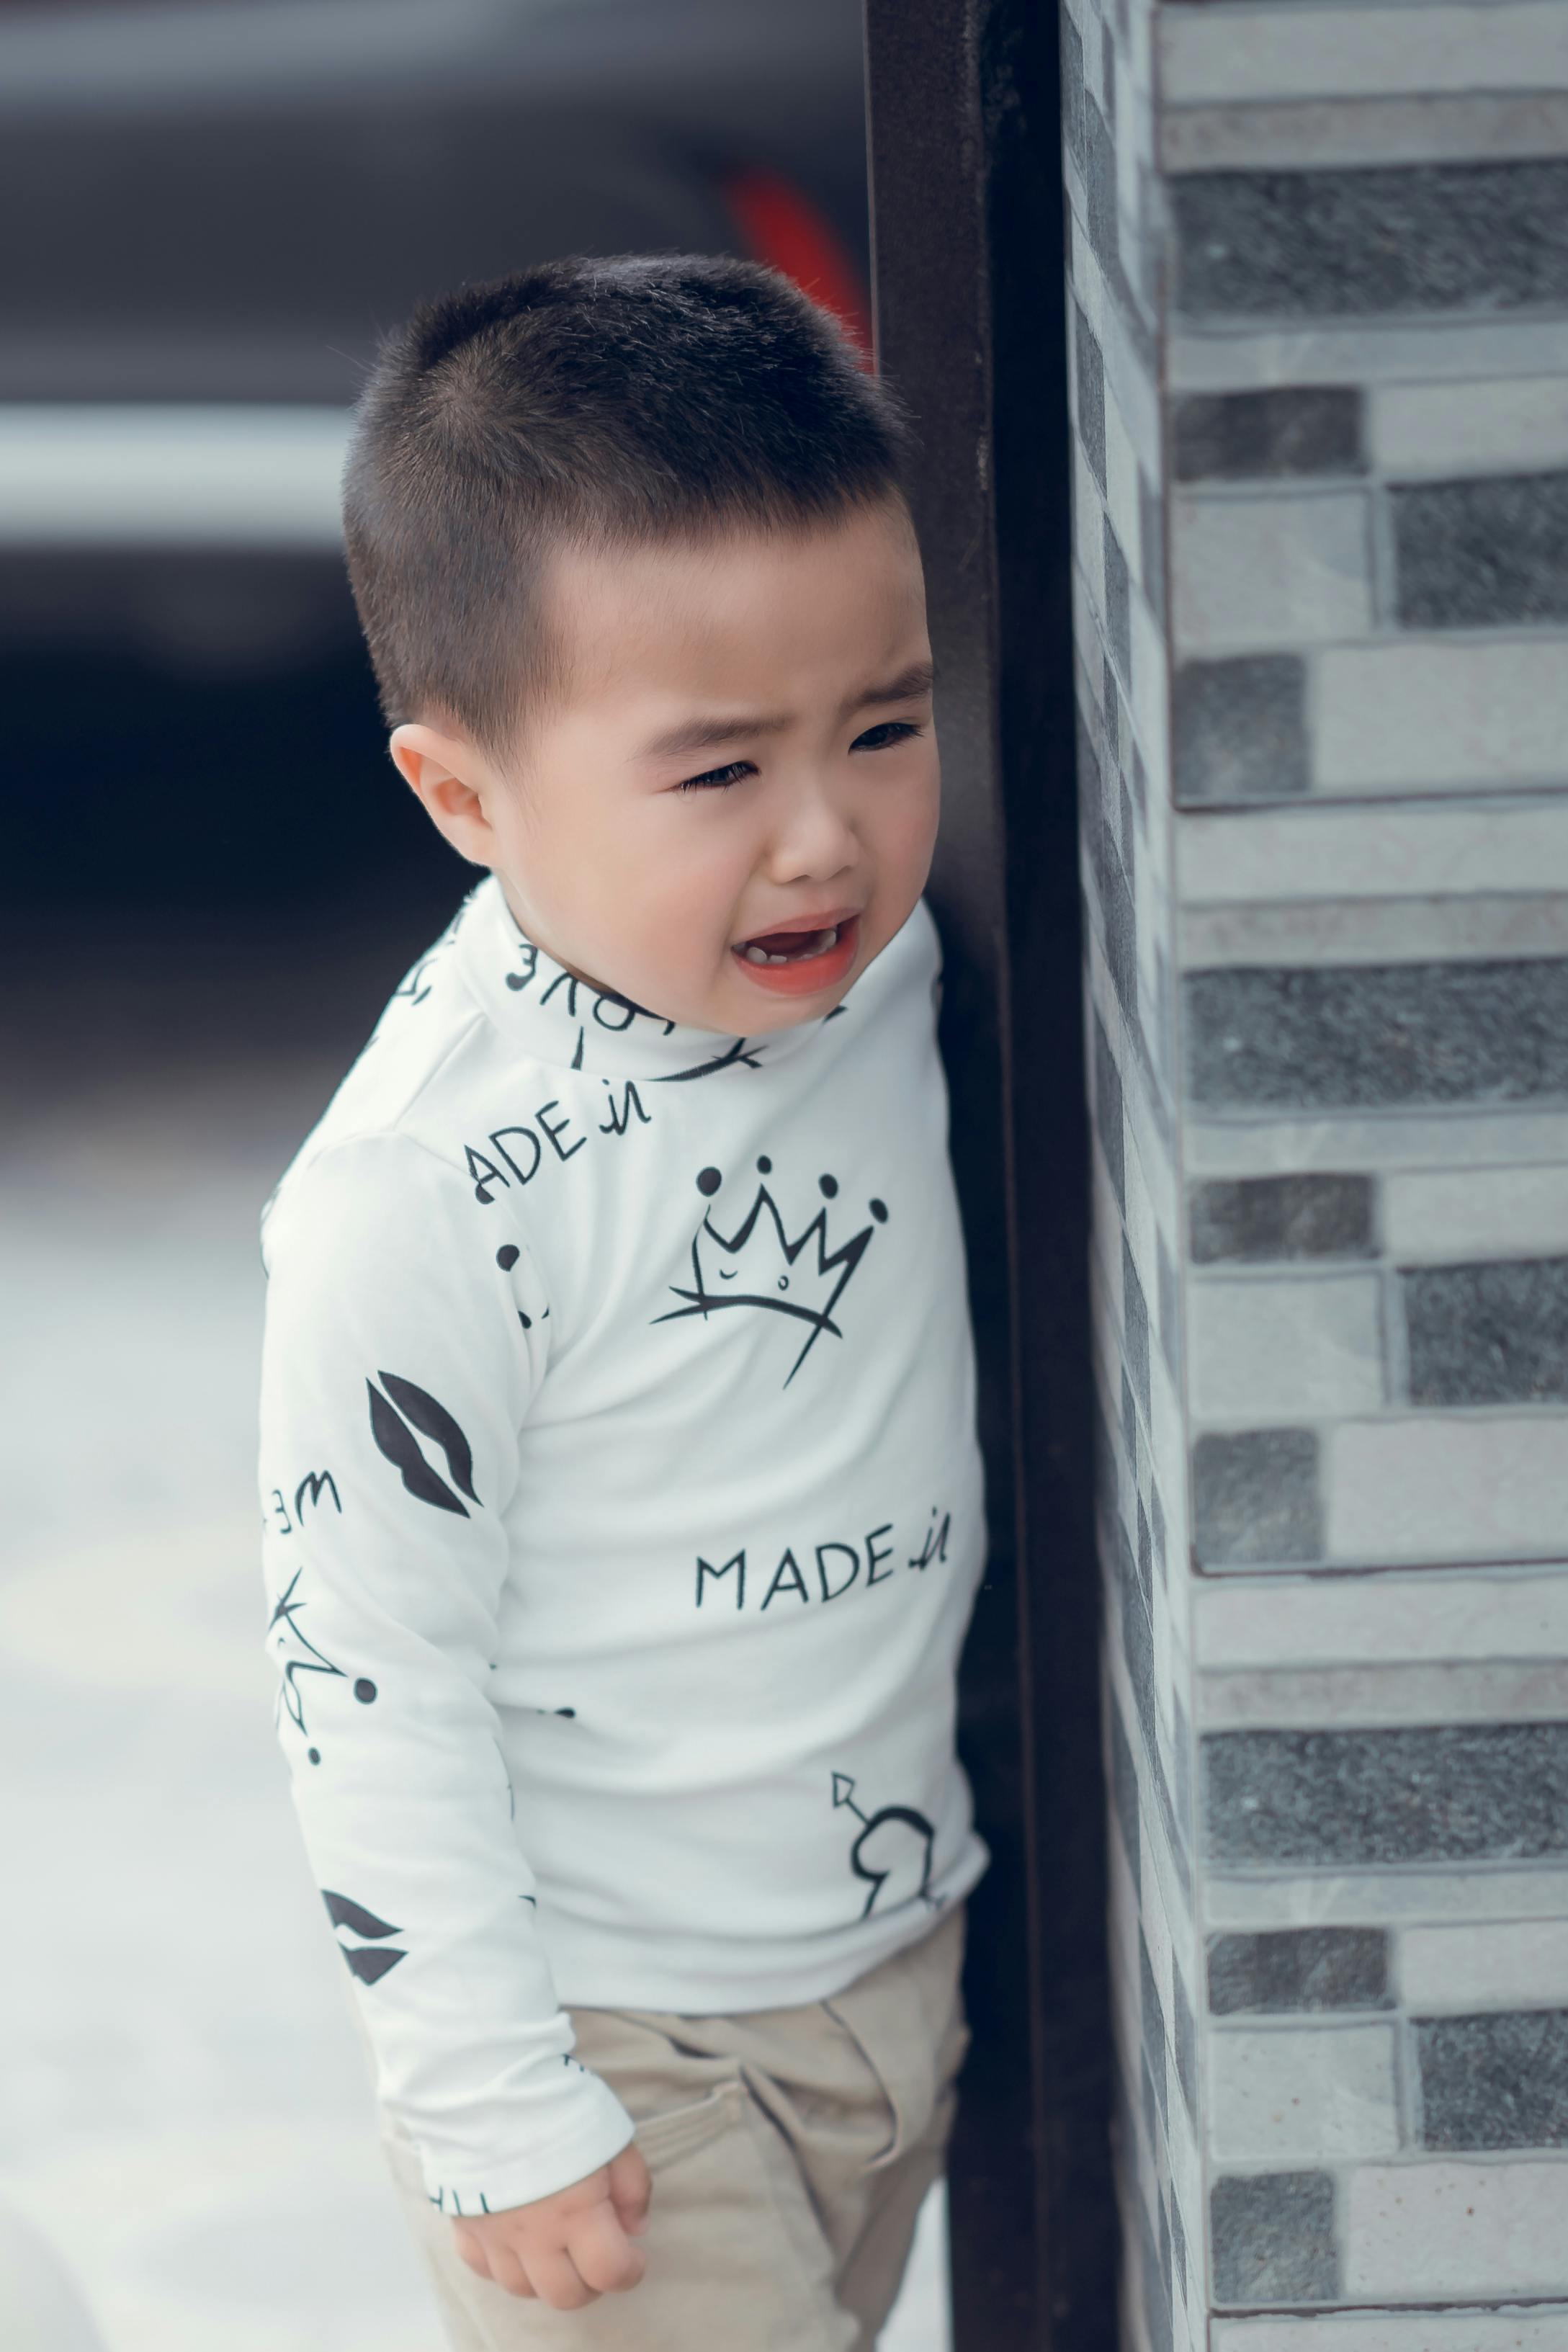 Little boy crying | Source: Pexels